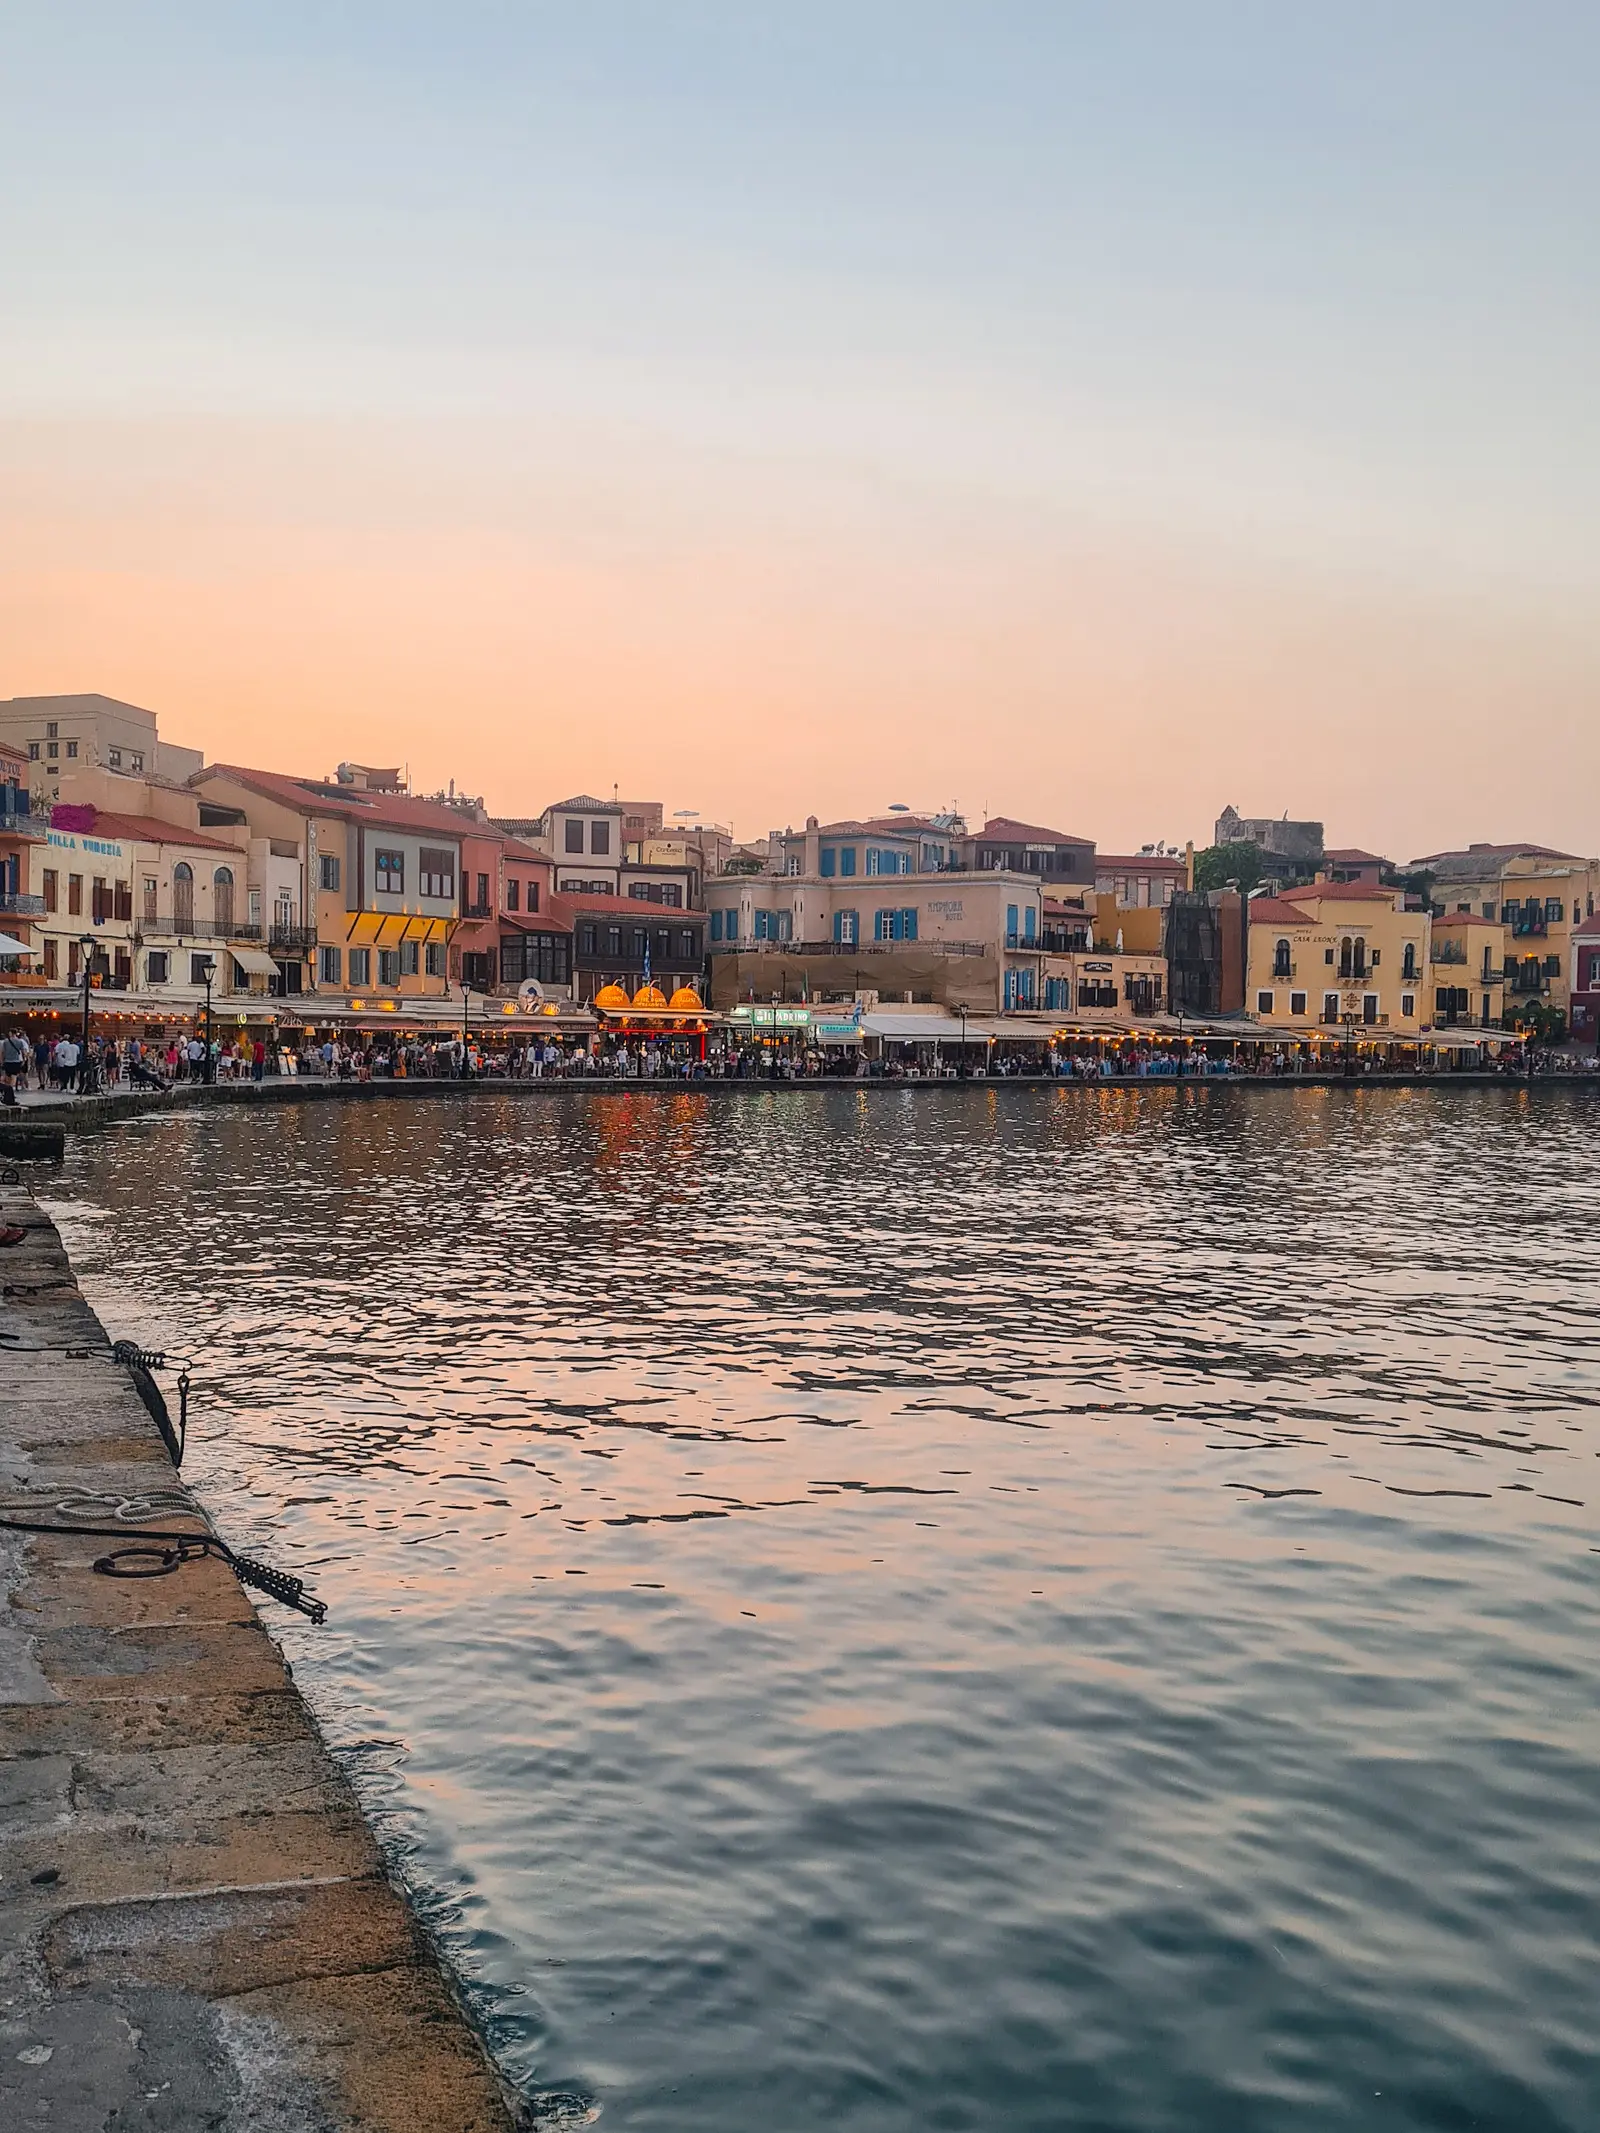 Buildings and restaurants full of people along the Venetian Harbor in Chania Old Town with an orange sunset in the background.